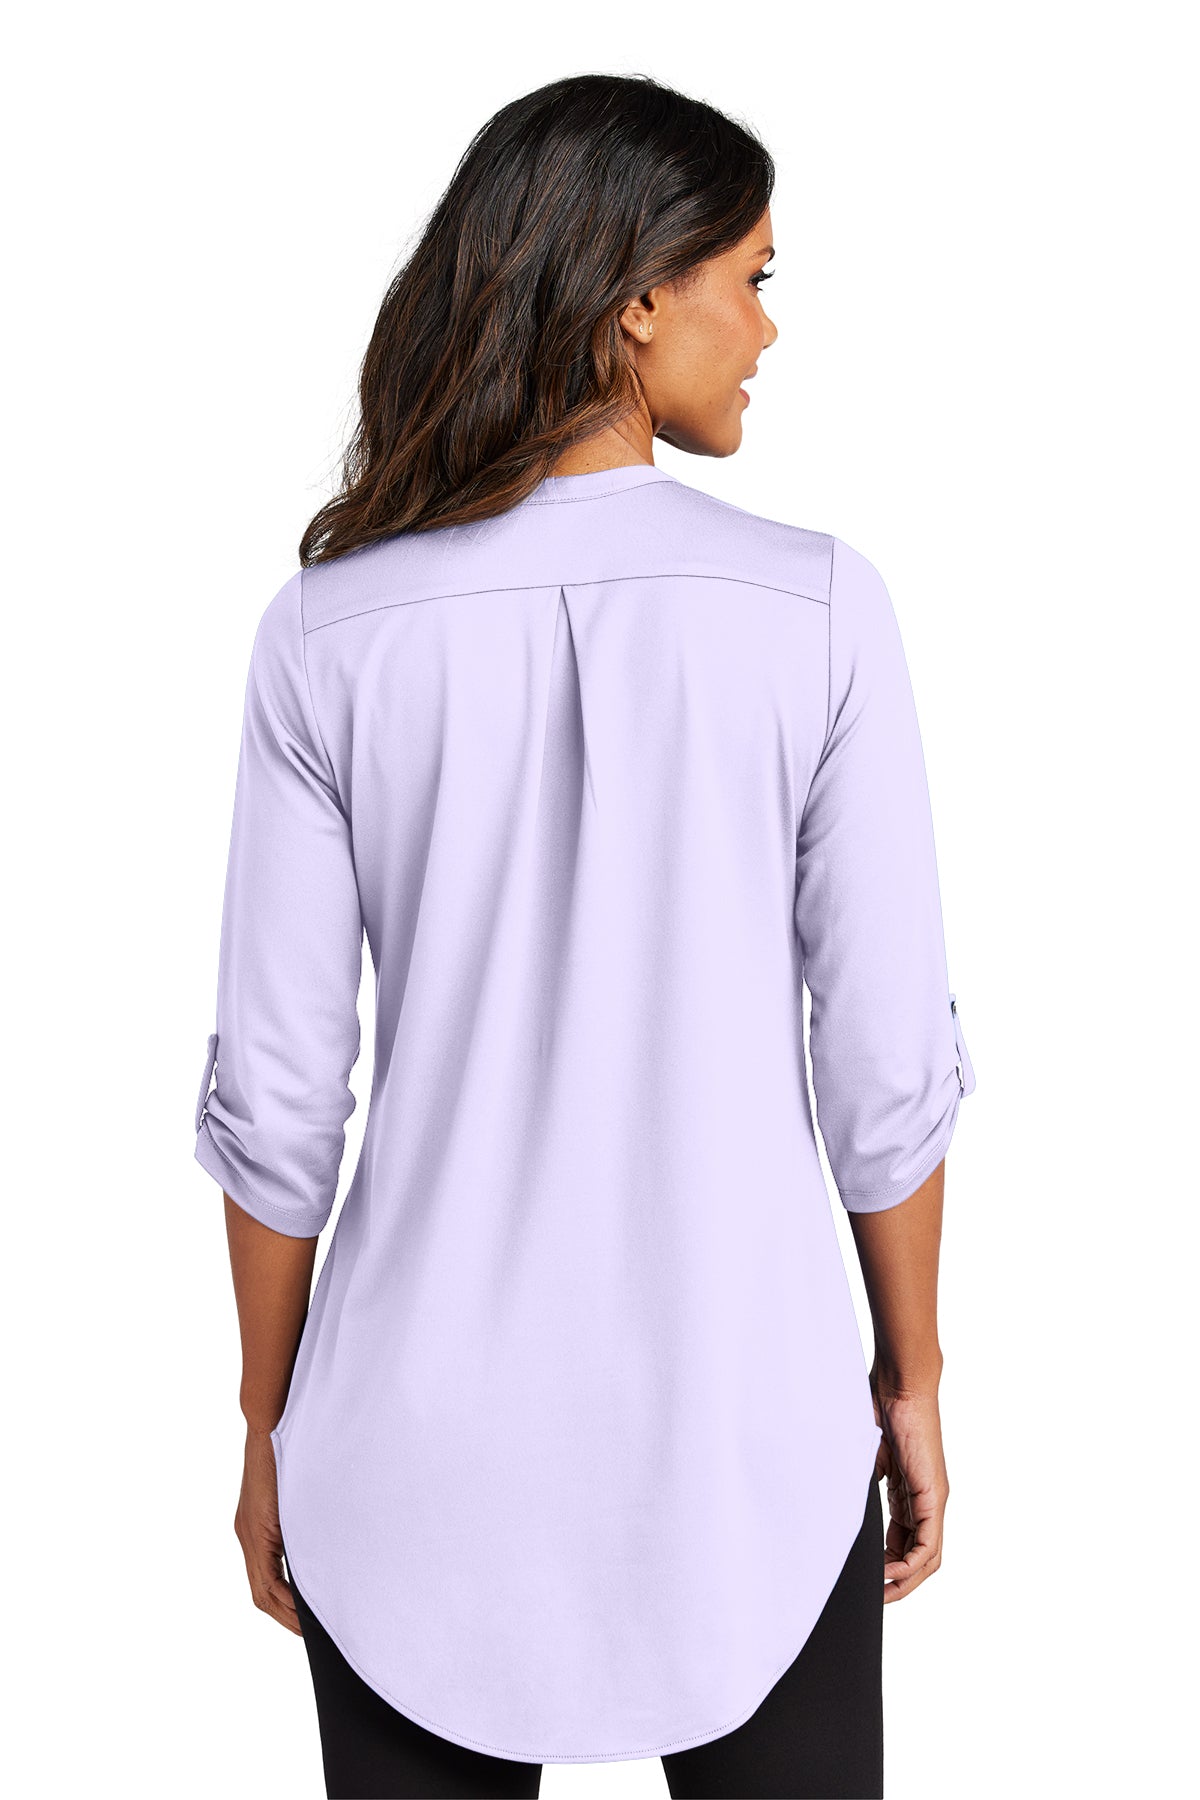 Thea City Stretch 3/4 Sleeve Tunic - Bright Lavender (Ships in 1-2 Weeks)